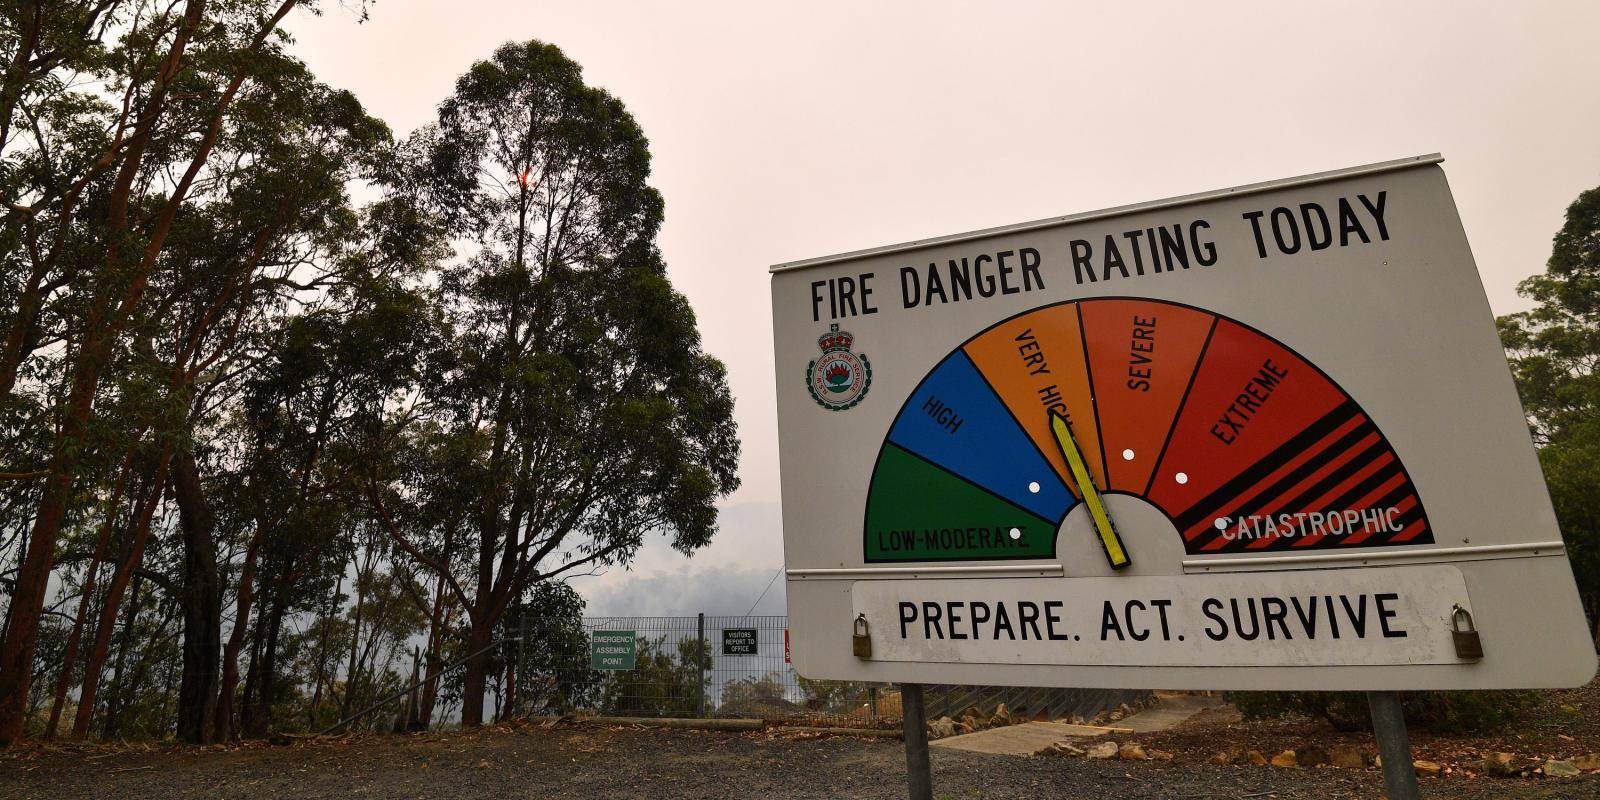 Fire rating sign in Australia